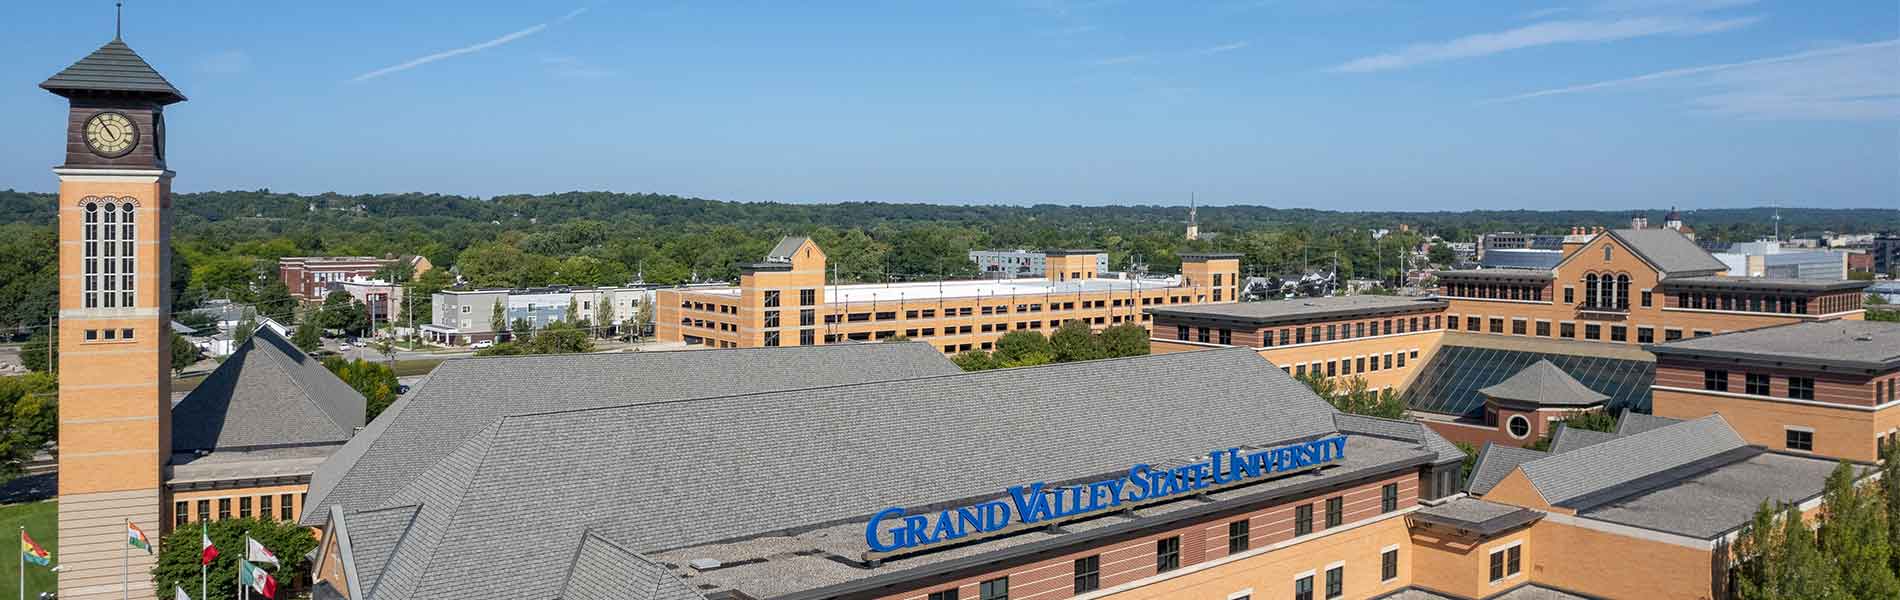 Aerial view of Grand Valley State University clock tower and buildings.